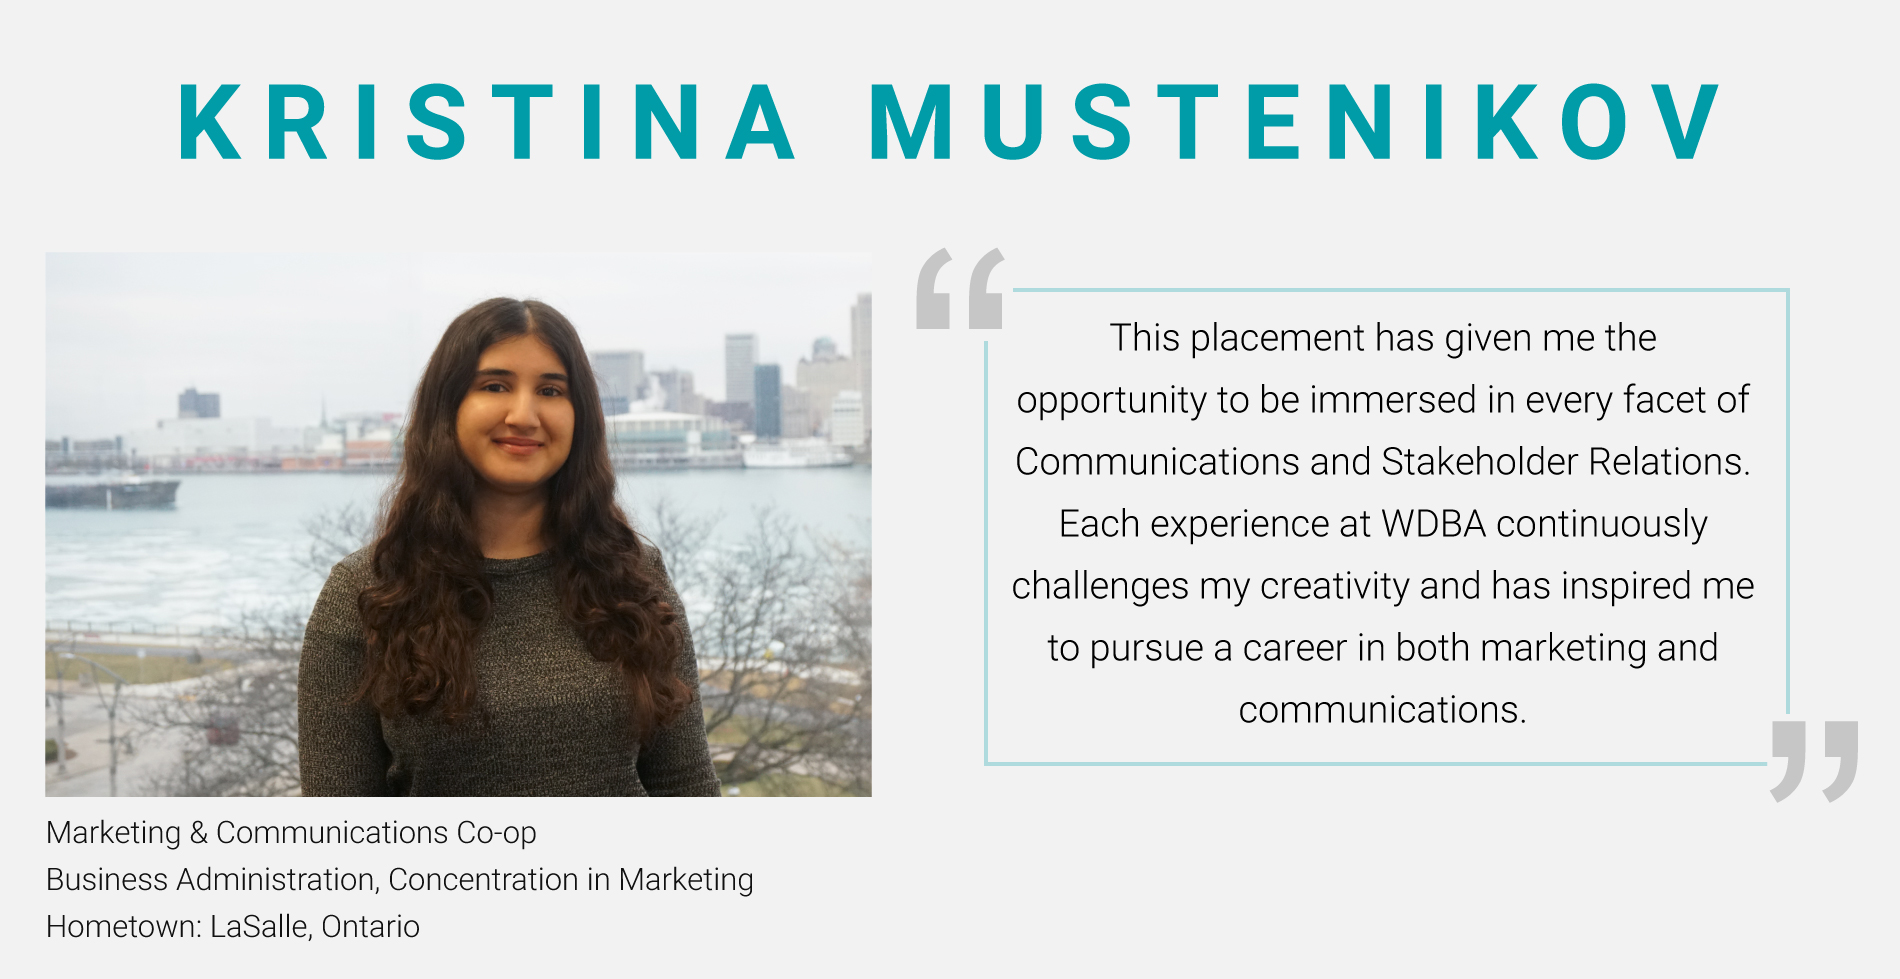 Photo of Kristina Mustenikov, Marketing & Communications Co-Op from the Business Administration Program with a Concentration in Marketing. "This placement has given me the opportunity to be immersed in every facet of Communications and Stakeholder Relations. Each expeirence at WDBA continuously challenges my creativity and has inspired me to pursue a career in both marketing and communictaions." 